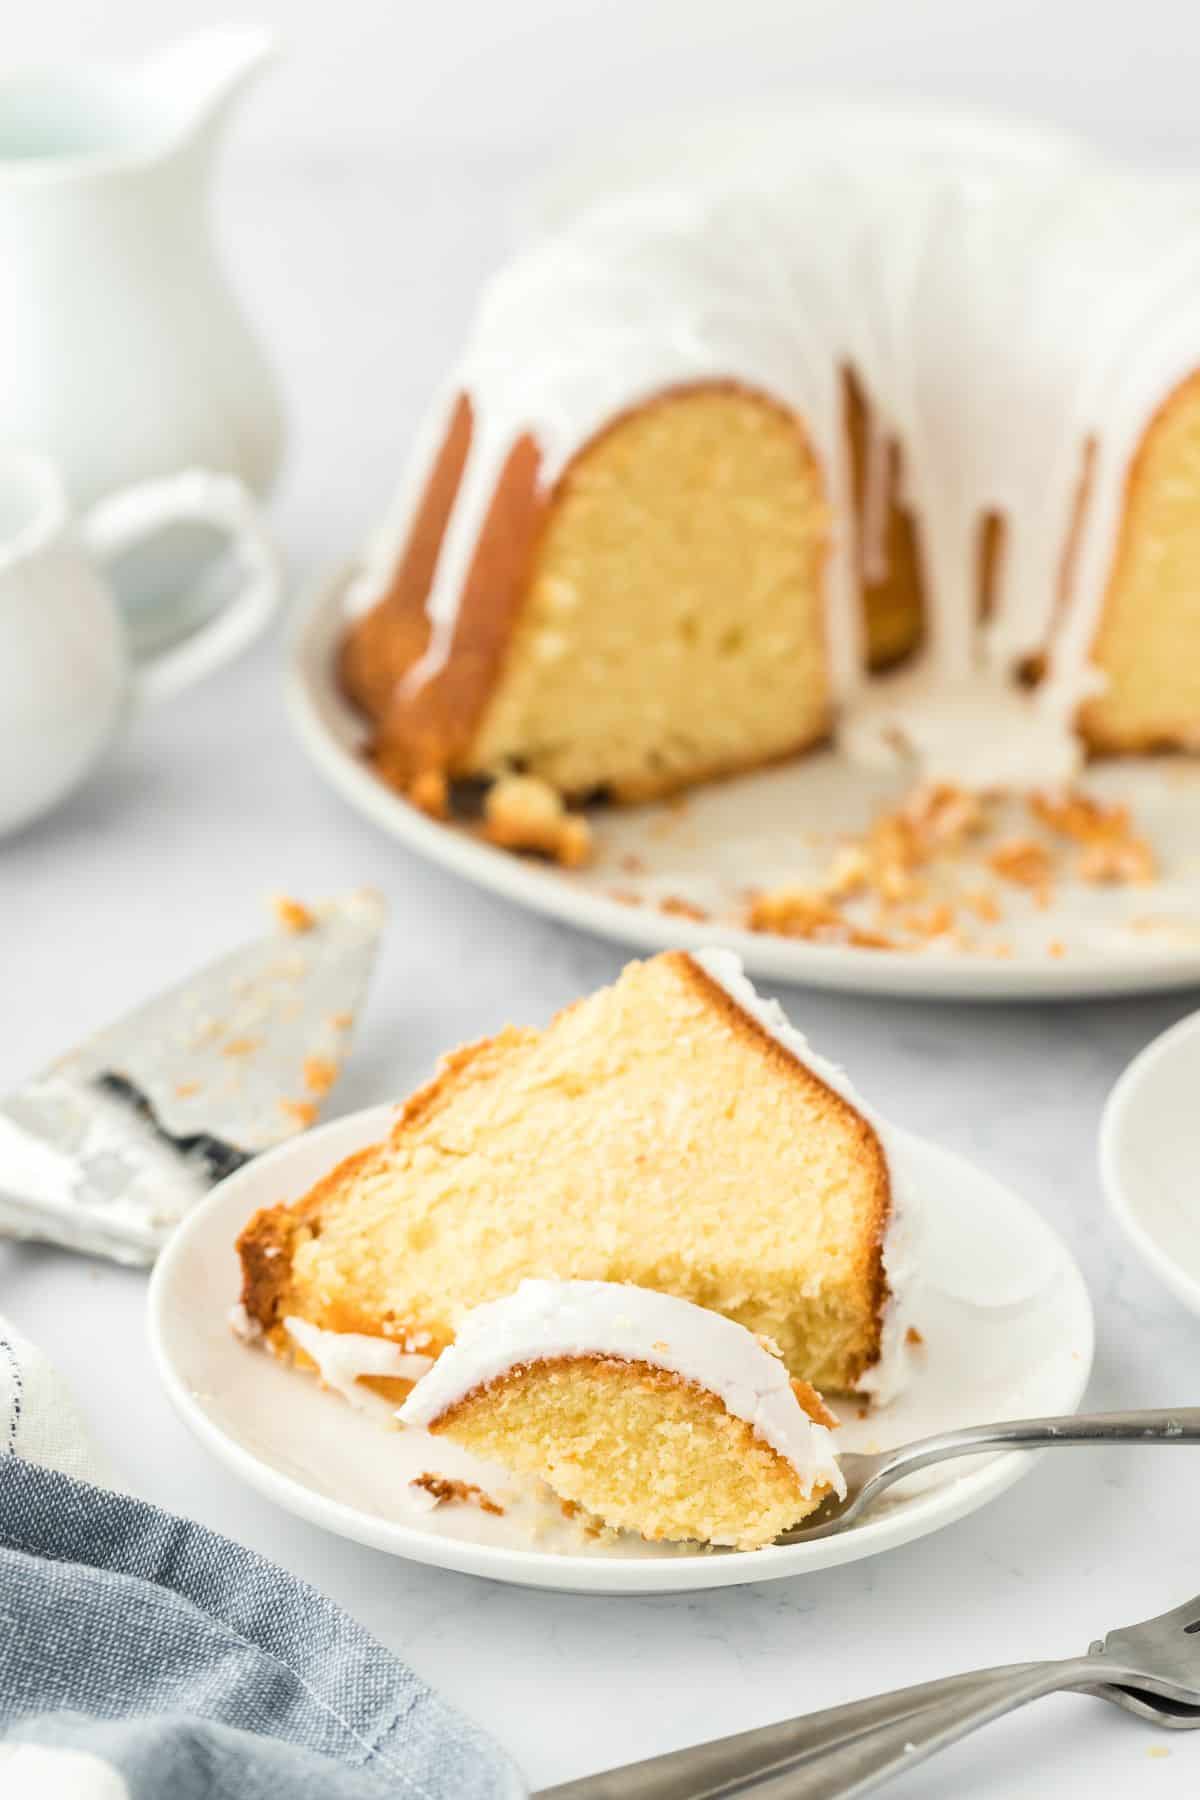 A slice of million dollar pound cake with white glaze on a white plate, with a fork resting beside it. In the background there's the rest of the cake on a serving platter